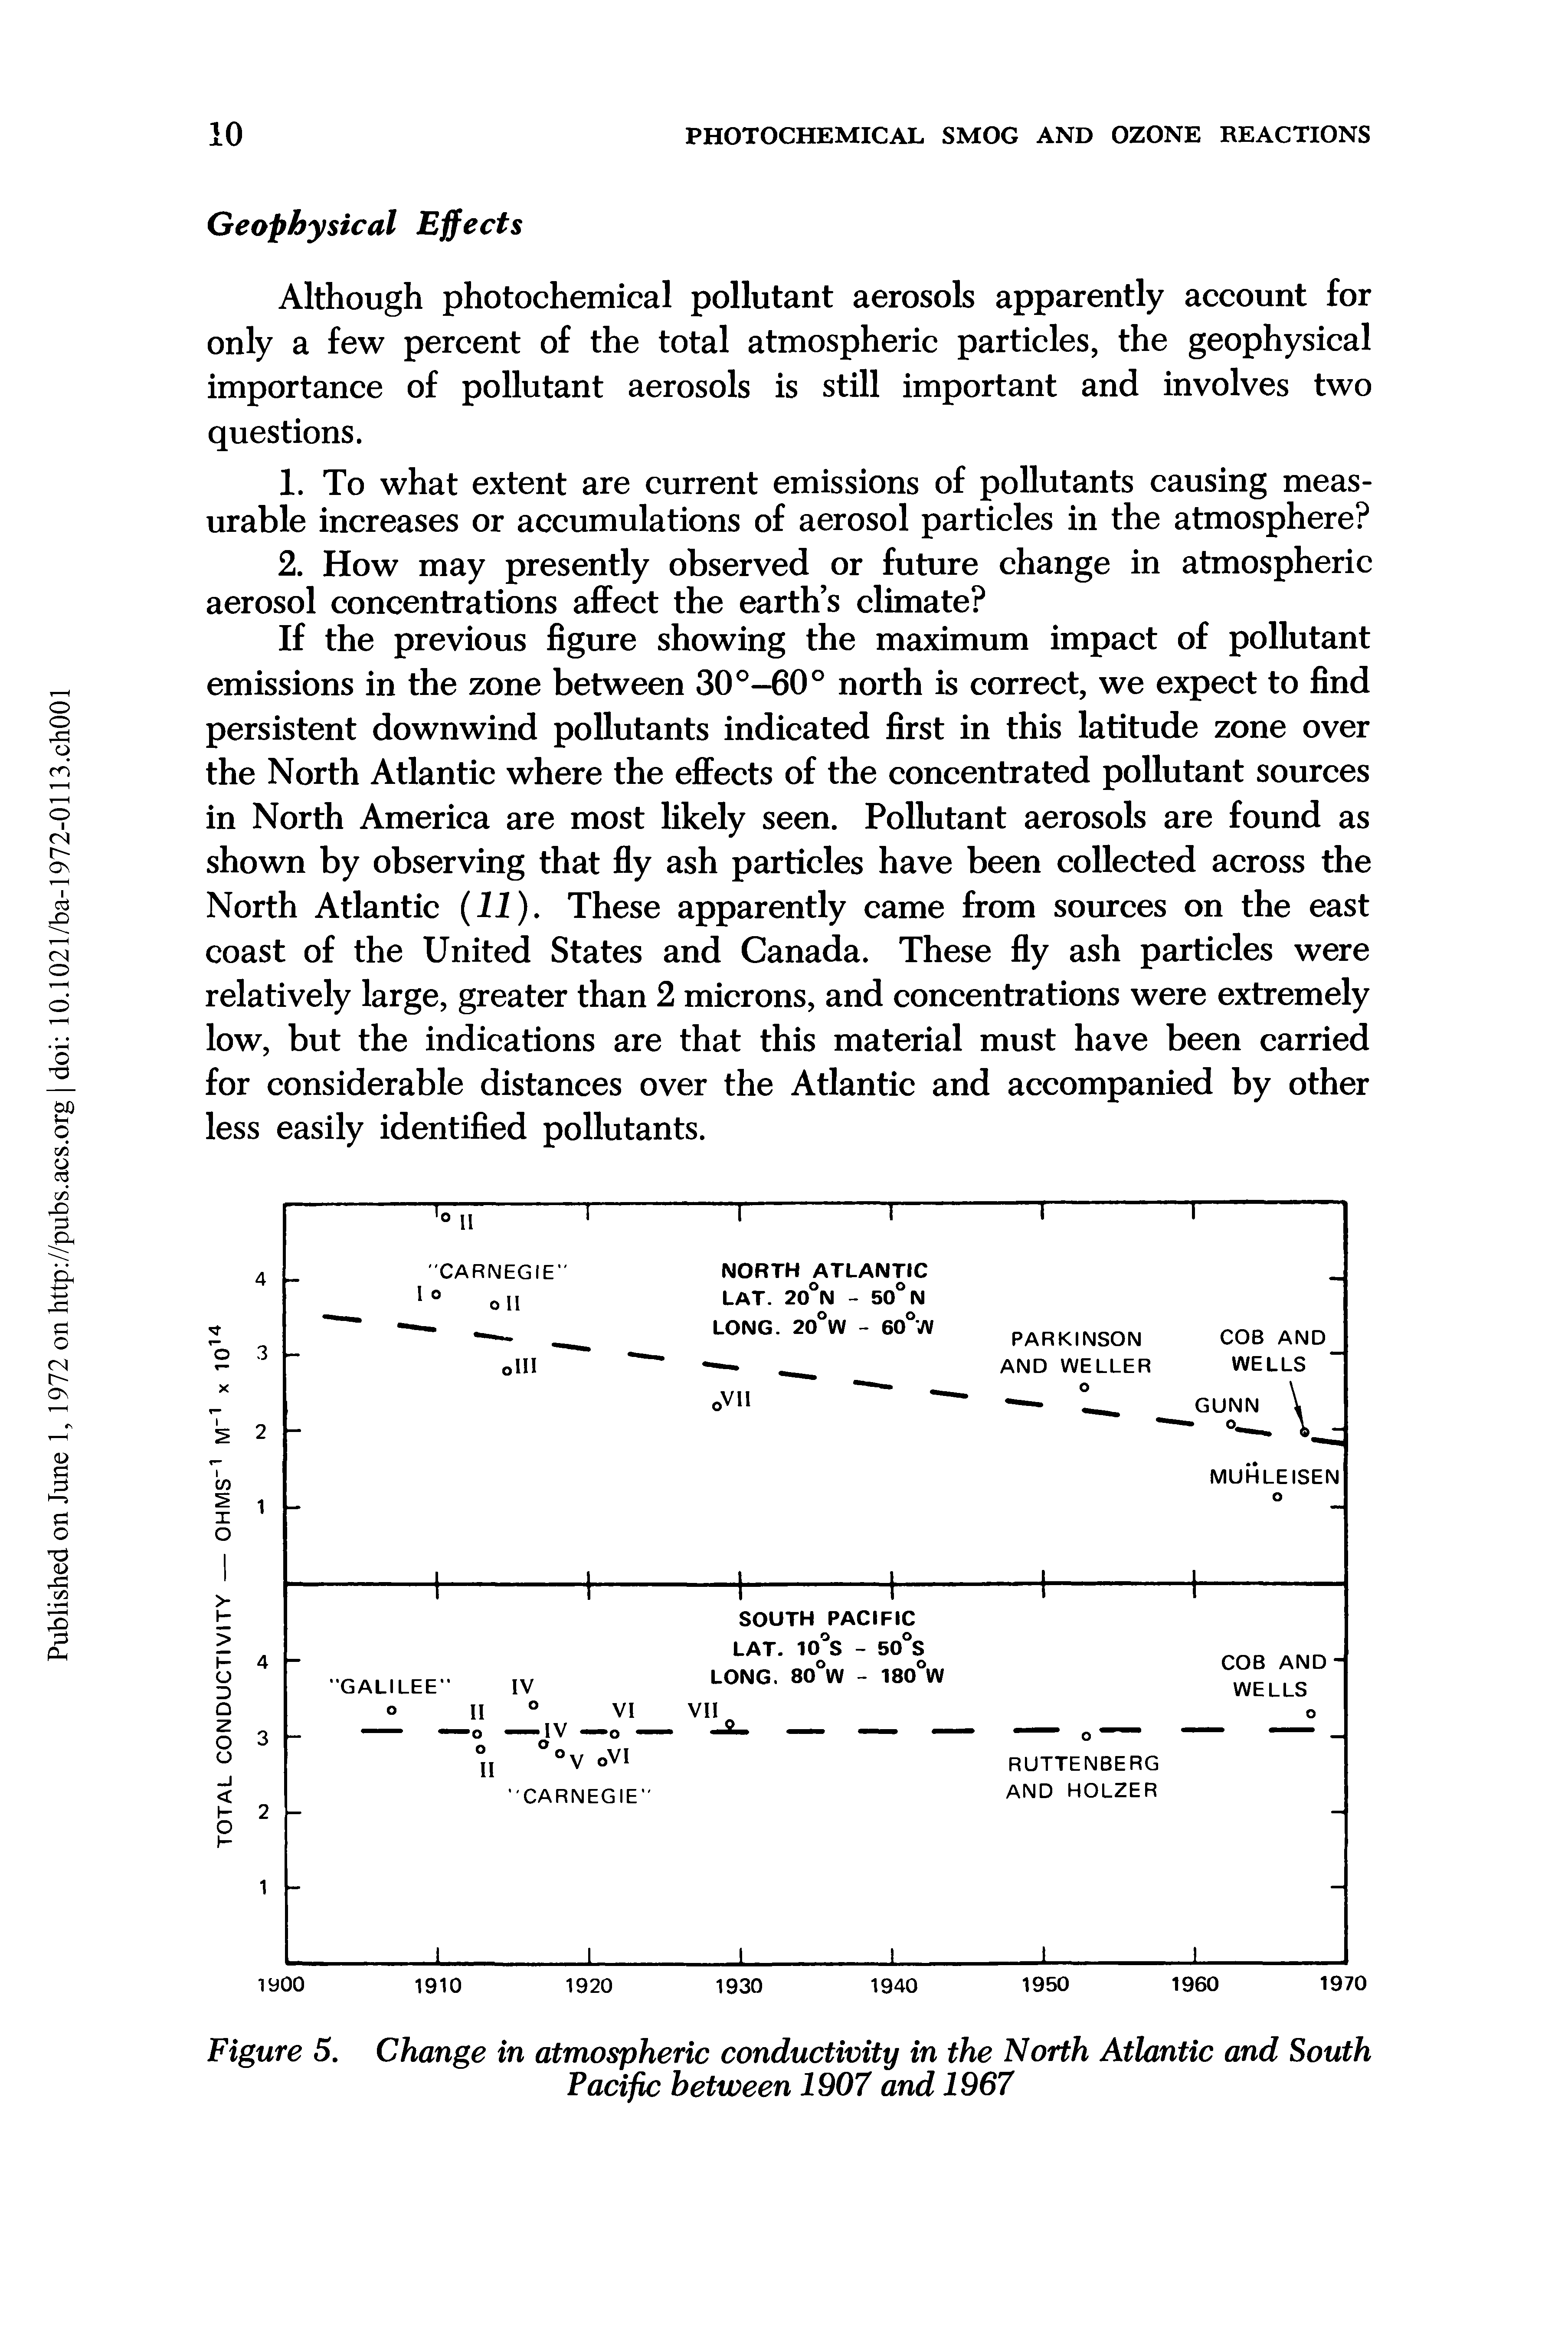 Figure 5. Change in atmospheric conductivity in the North Atlantic and South Pacific between 1907 and 1967...